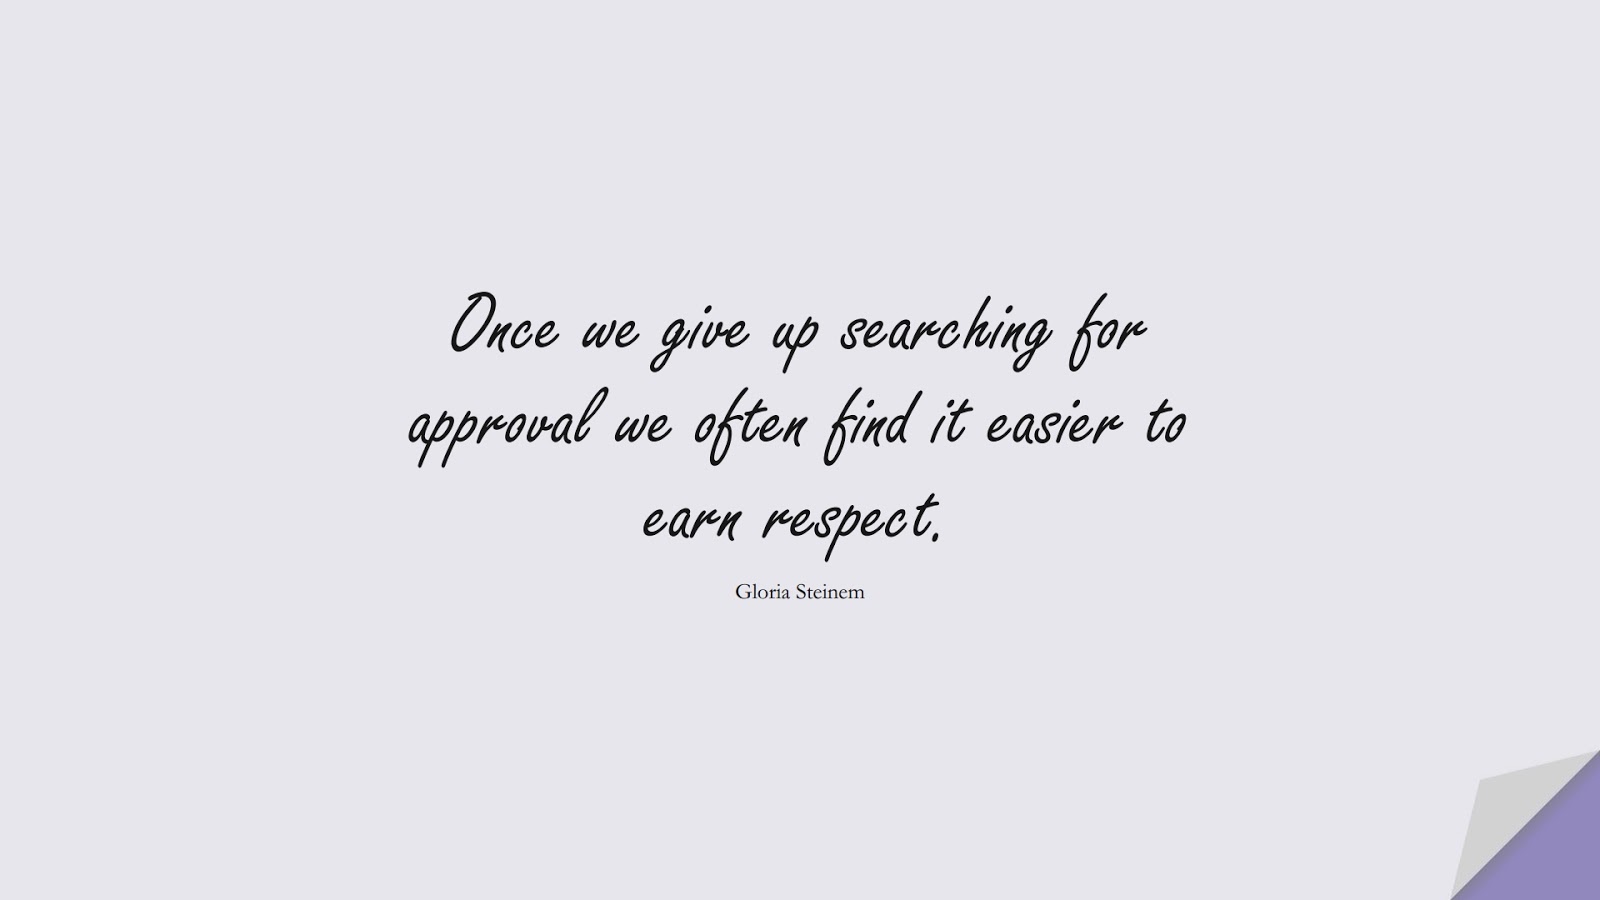 Once we give up searching for approval we often find it easier to earn respect. (Gloria Steinem);  #BeYourselfQuotes